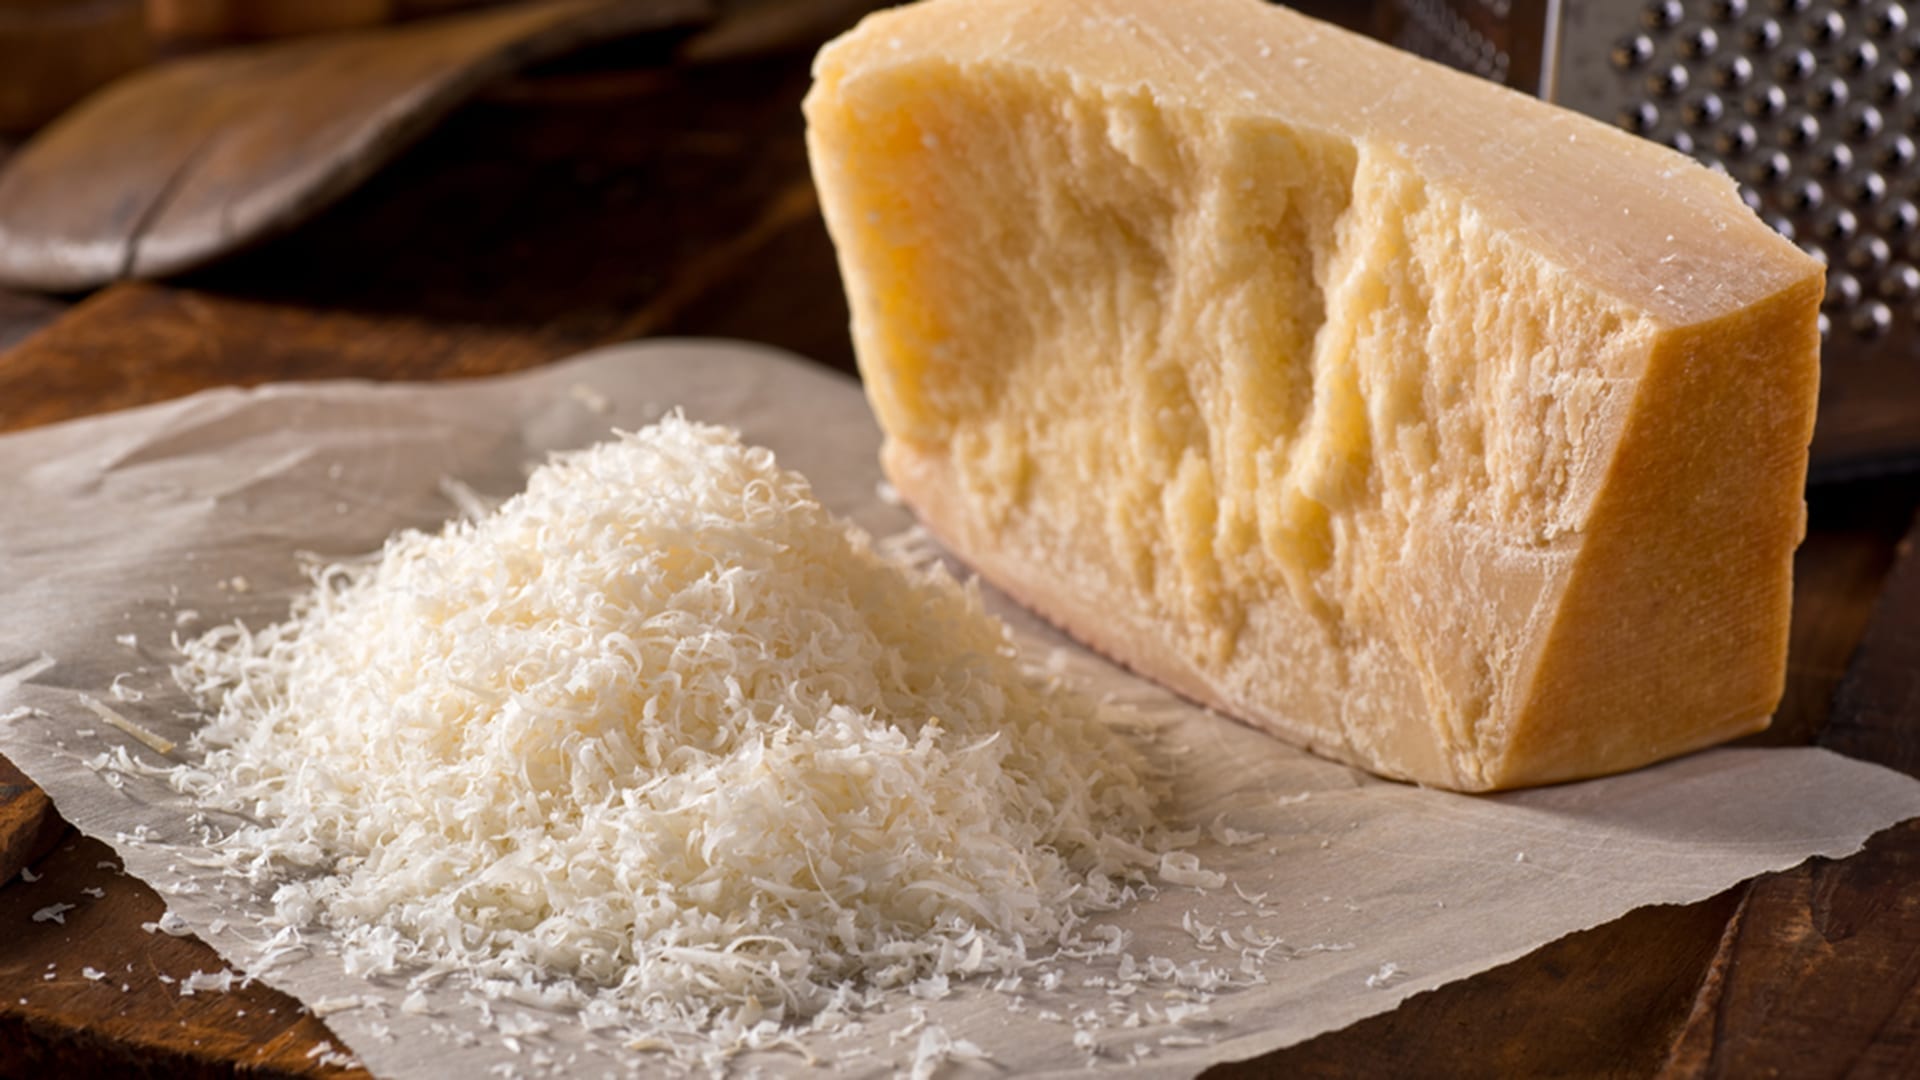 10 Cheesy Facts About the Parmesan Cheese That Came From Italy 2